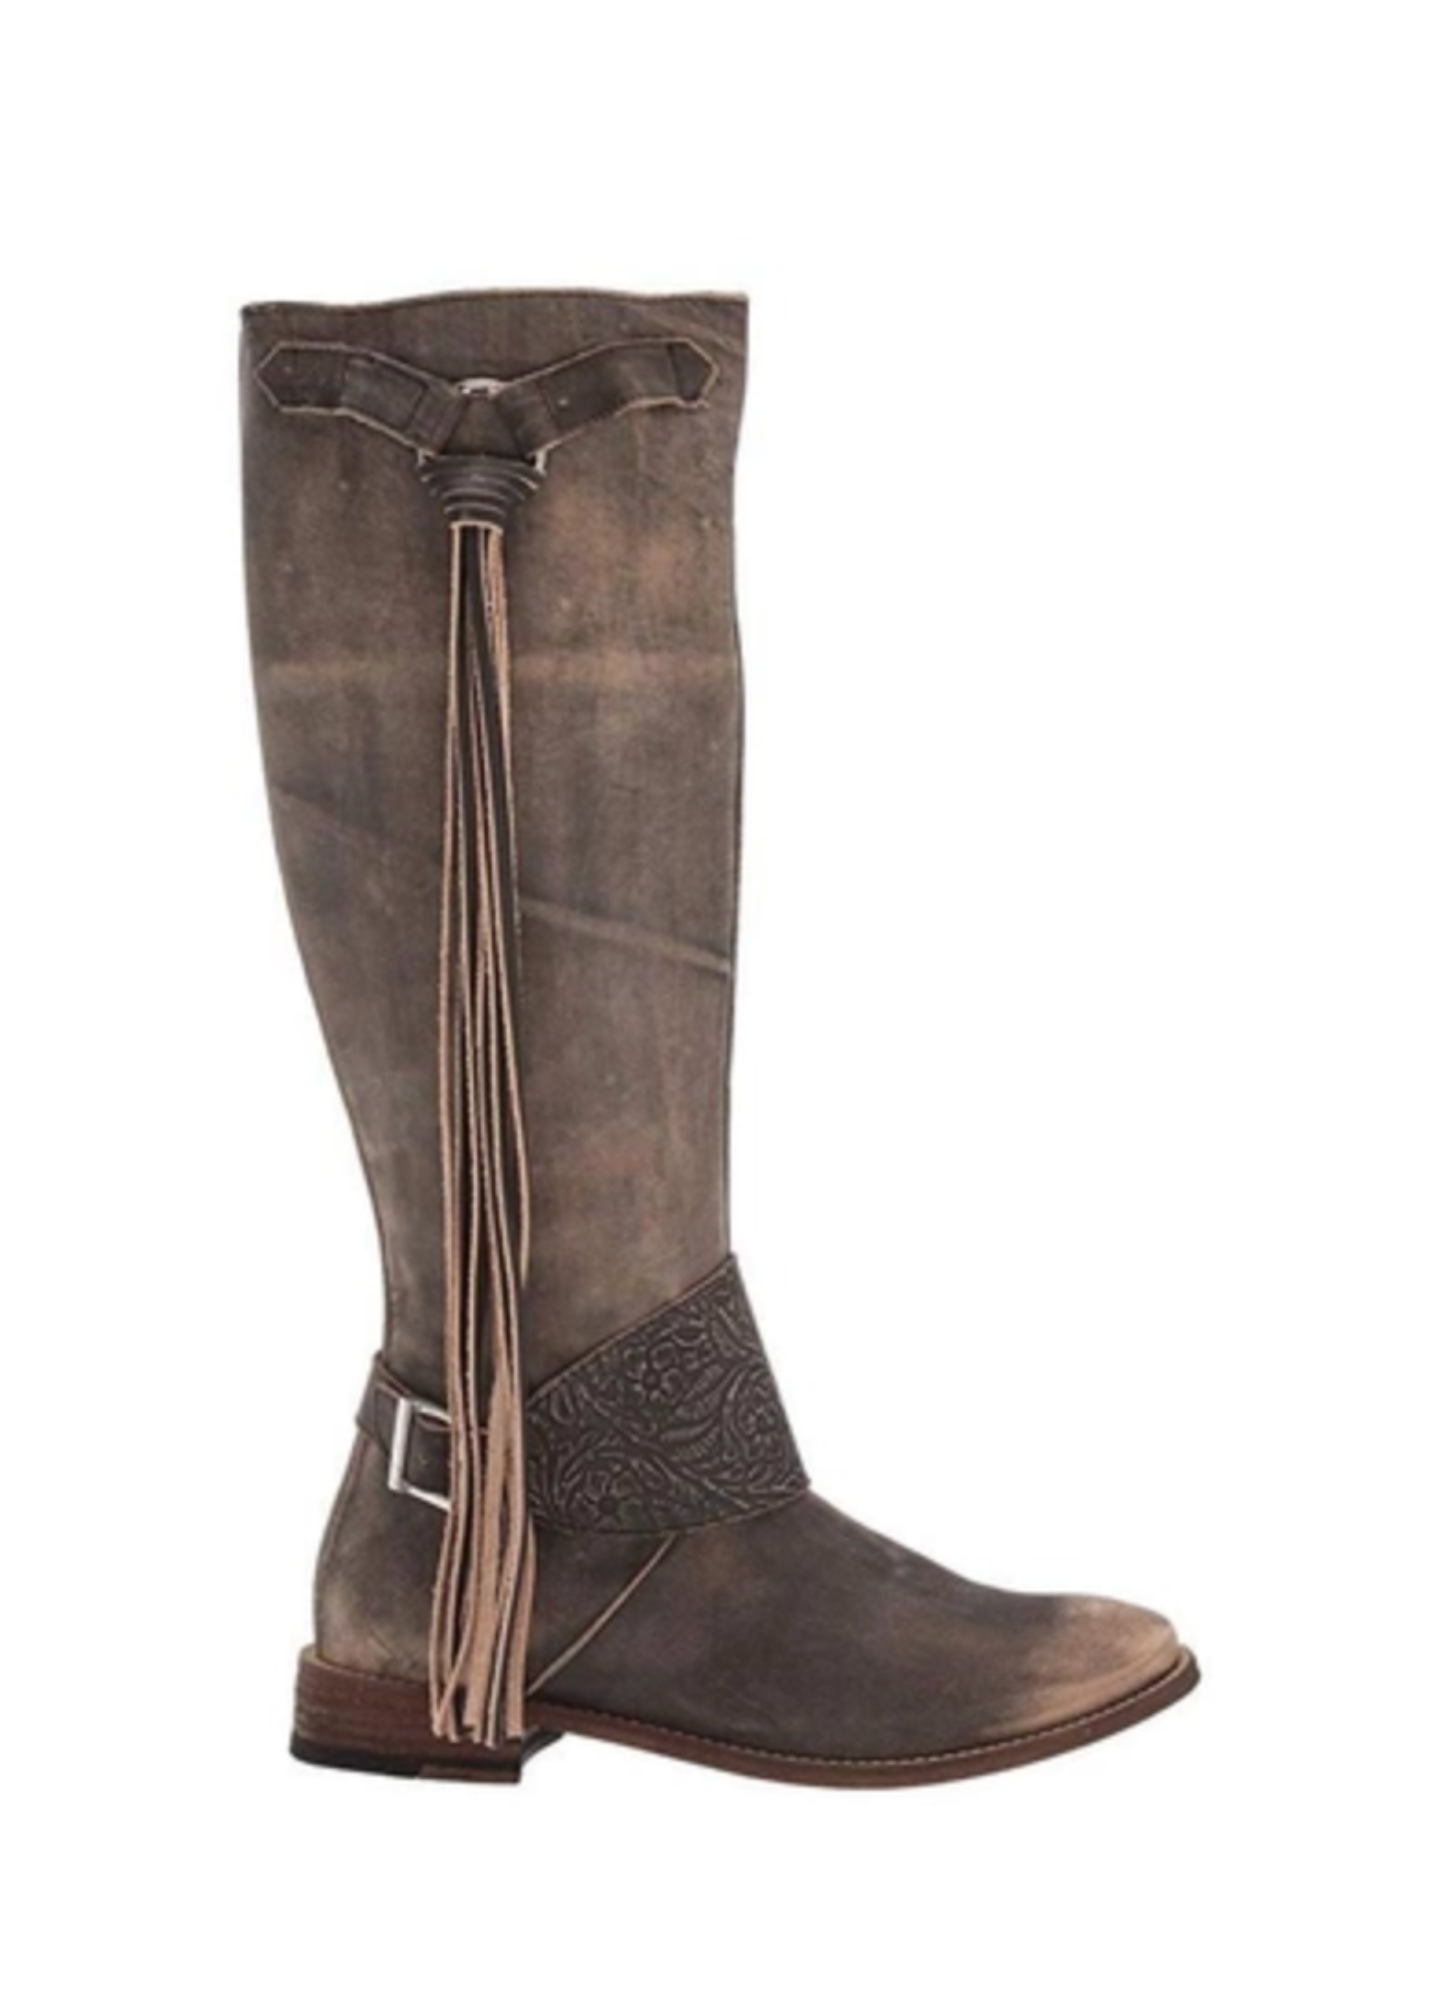 Rainstorm Tall Tooled Boots in Charcoal